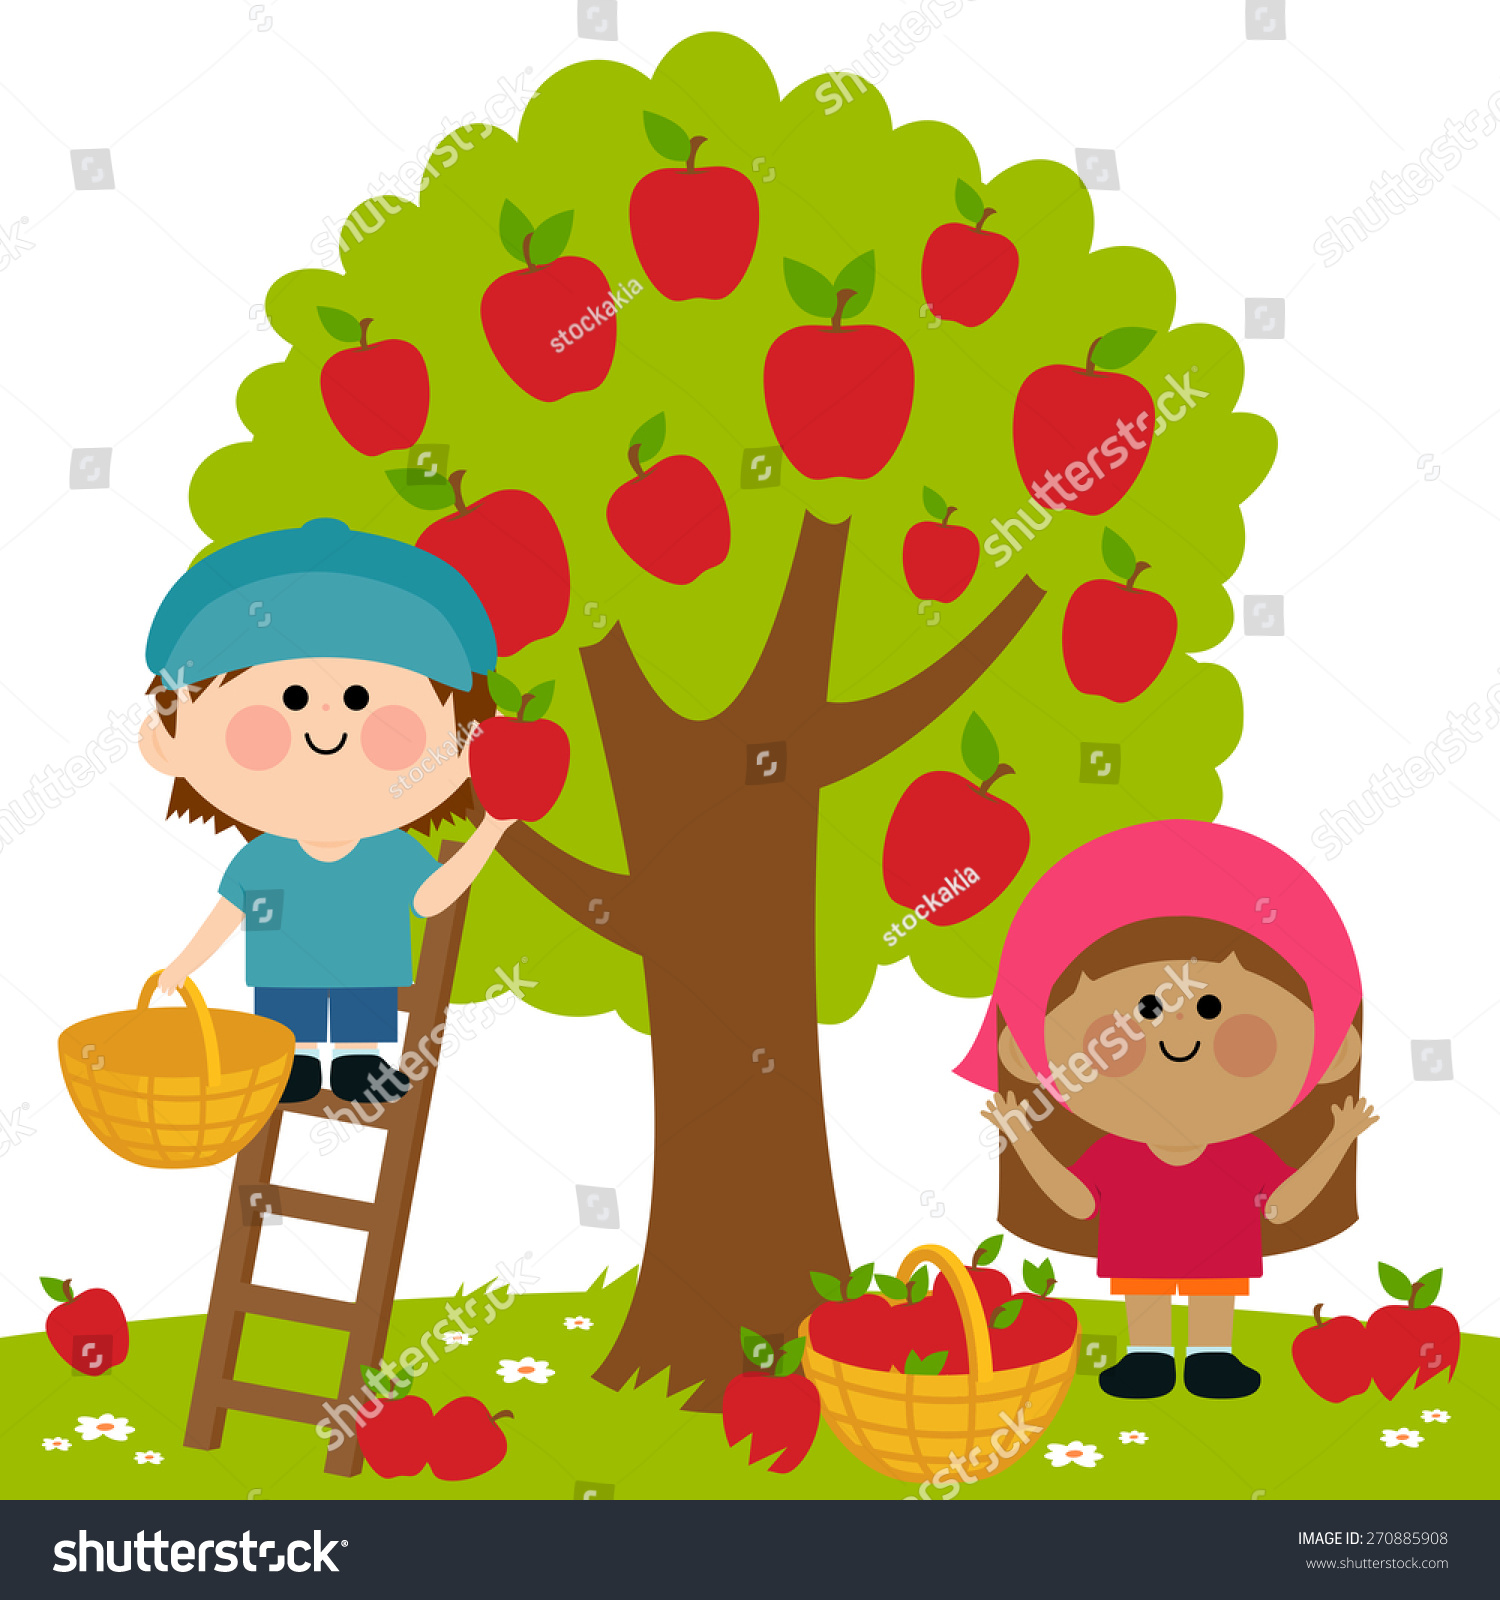 Kids Harvesting Apples. Vector Illustration Of Two Children, A Boy And